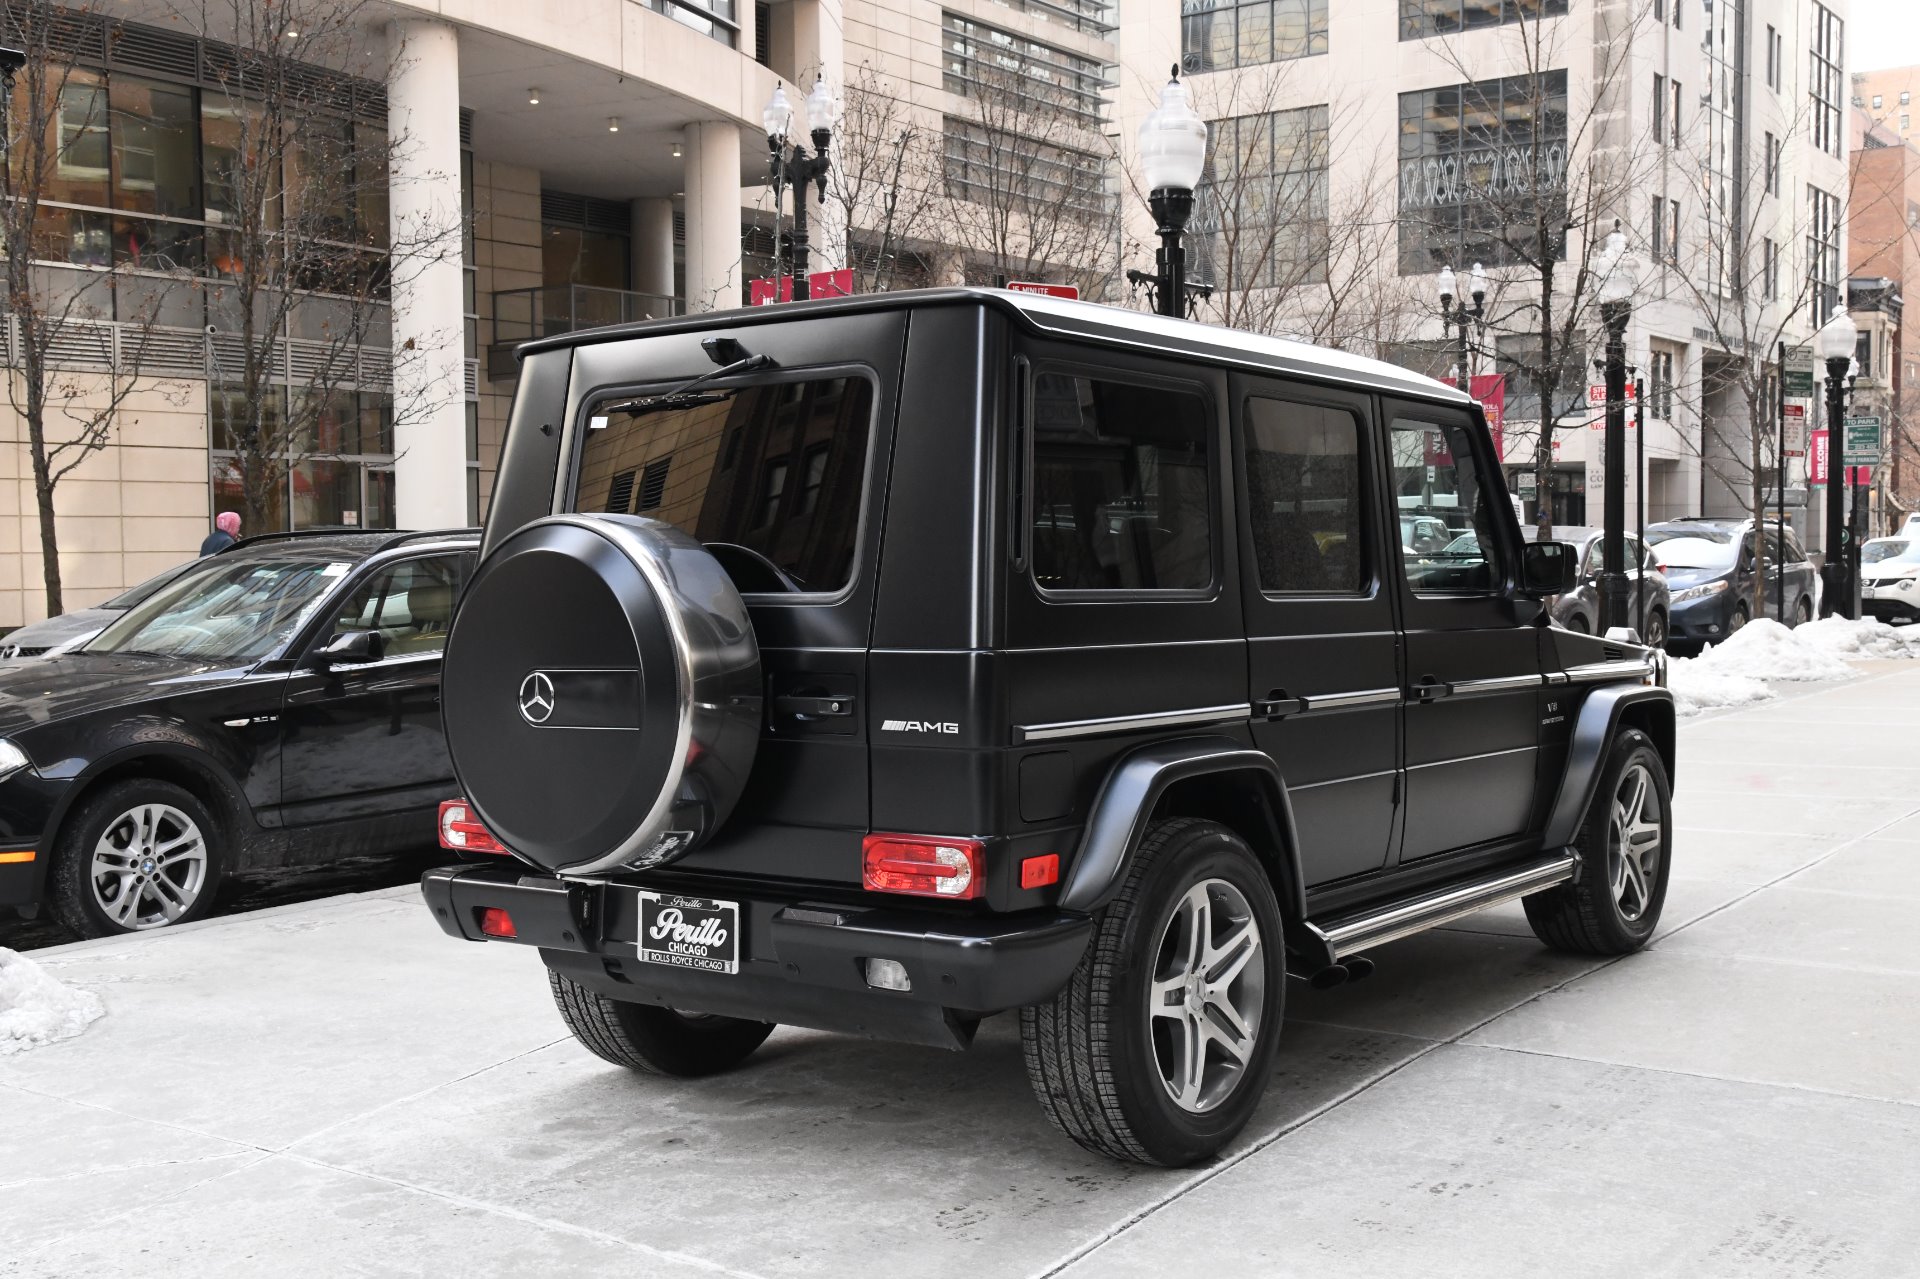 2011 Mercedes-Benz G-Class G 55 AMG Stock # B1017B for sale near Chicago, IL | IL Mercedes-Benz ...